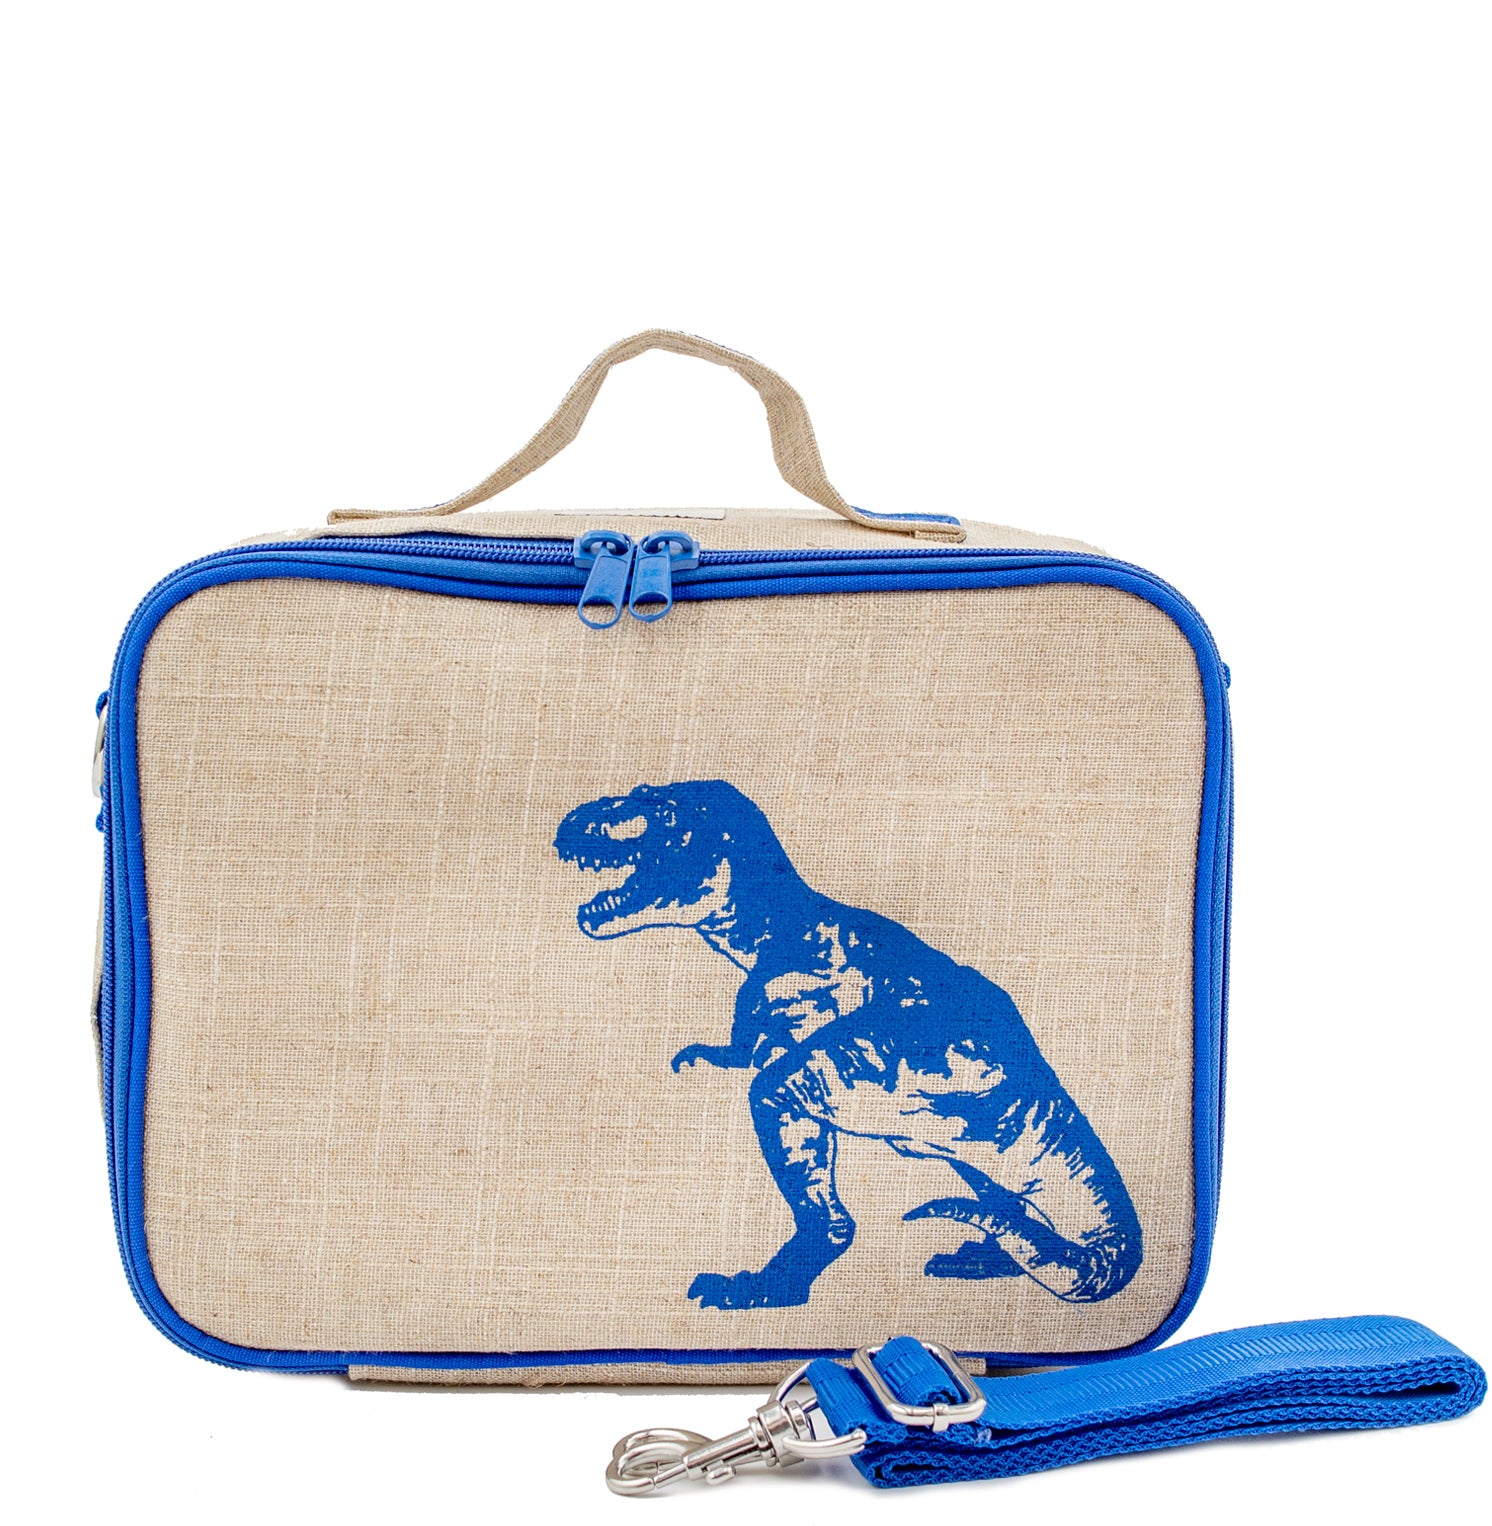 So Young Blue Dinosaur Lunch Box